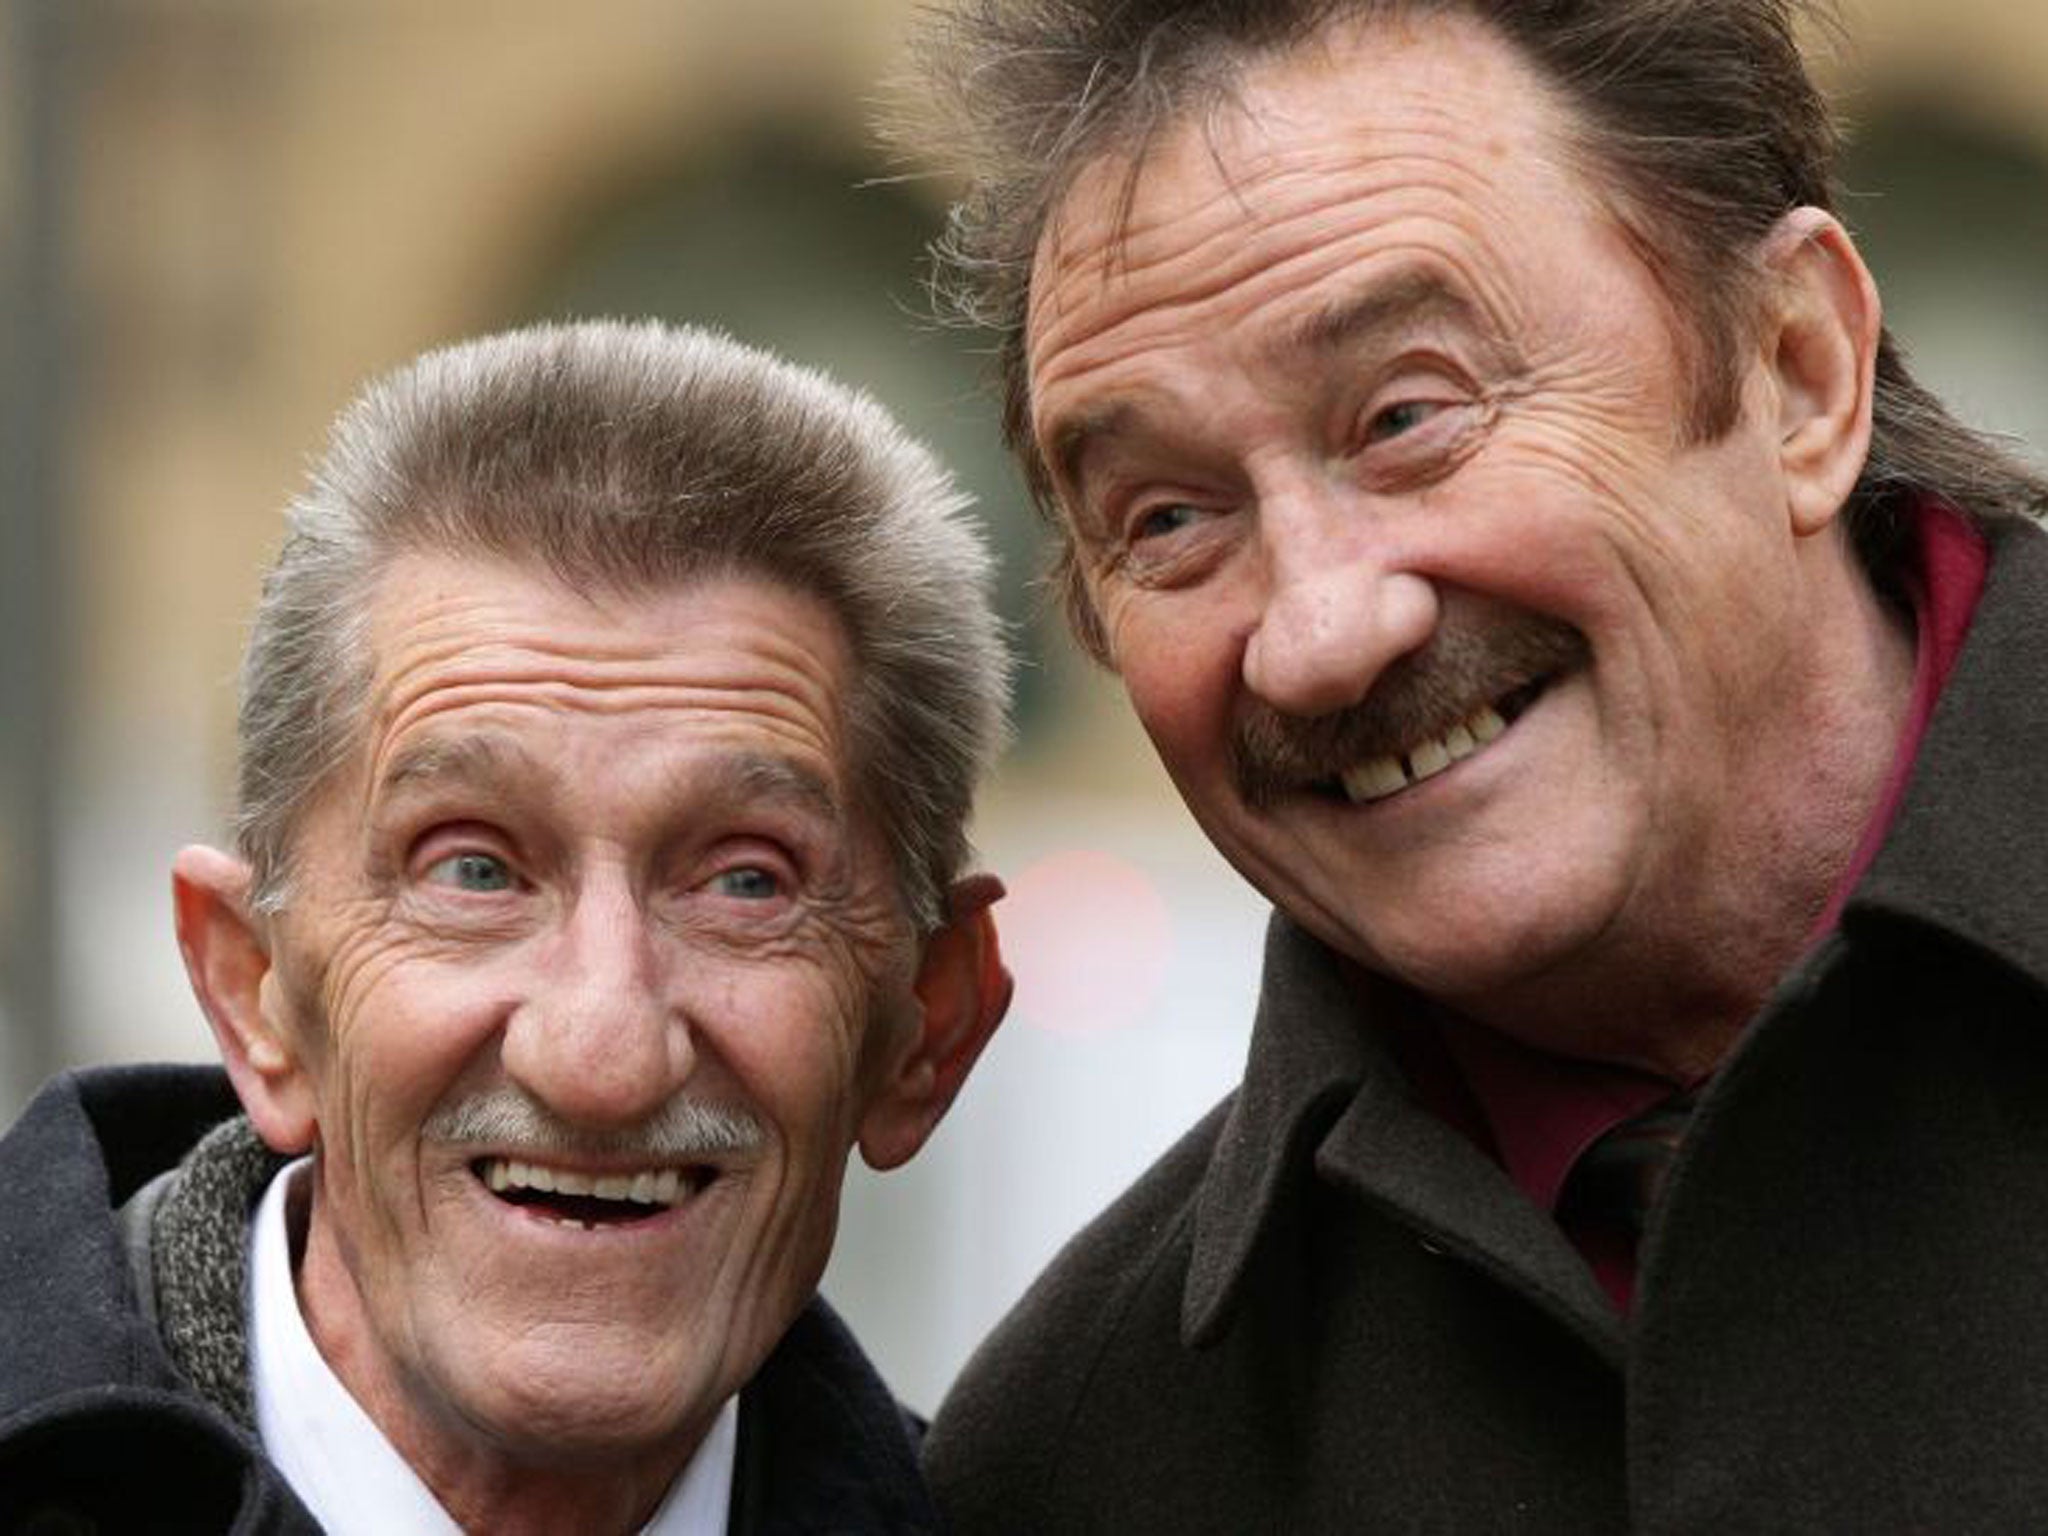 The Chuckle Brothers, Barry (left) and Paul Elliott gave evidence at Southwark Crown Court in London during the trial of Former DJ Dave Lee Travis